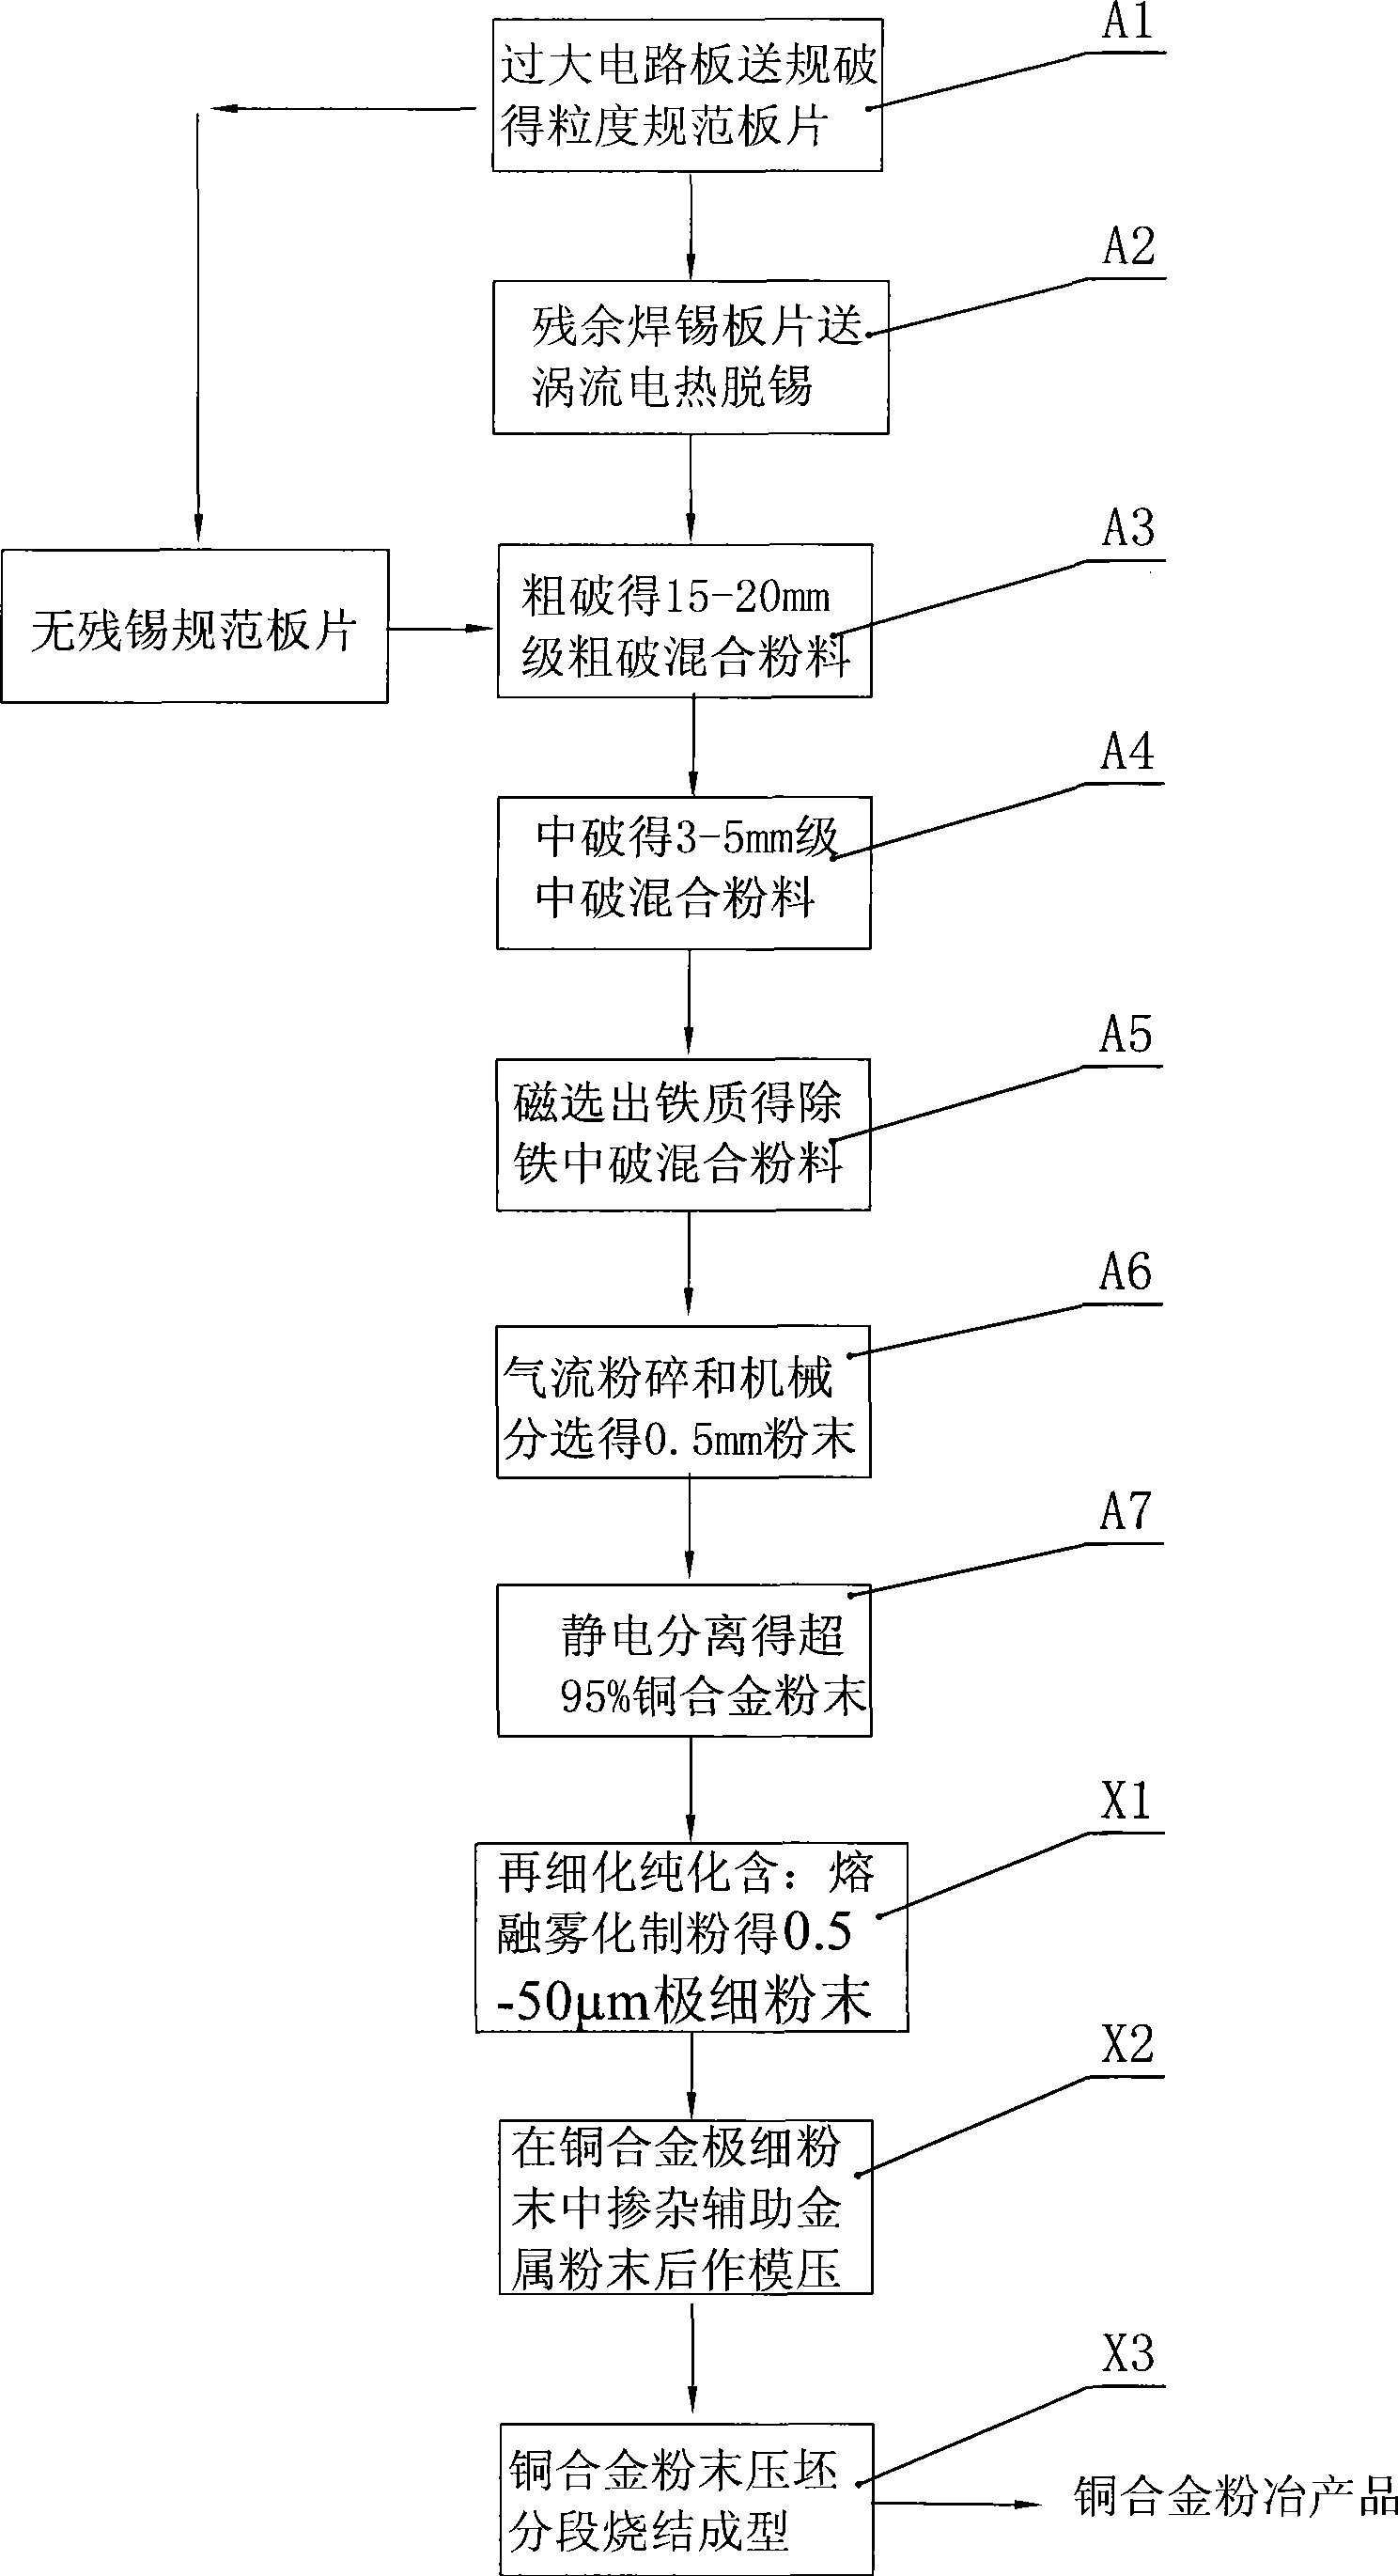 Method for recycle of copper alloy from waste circuit board and cyclic reconstruction of powder metallurgical product as well as device system thereof